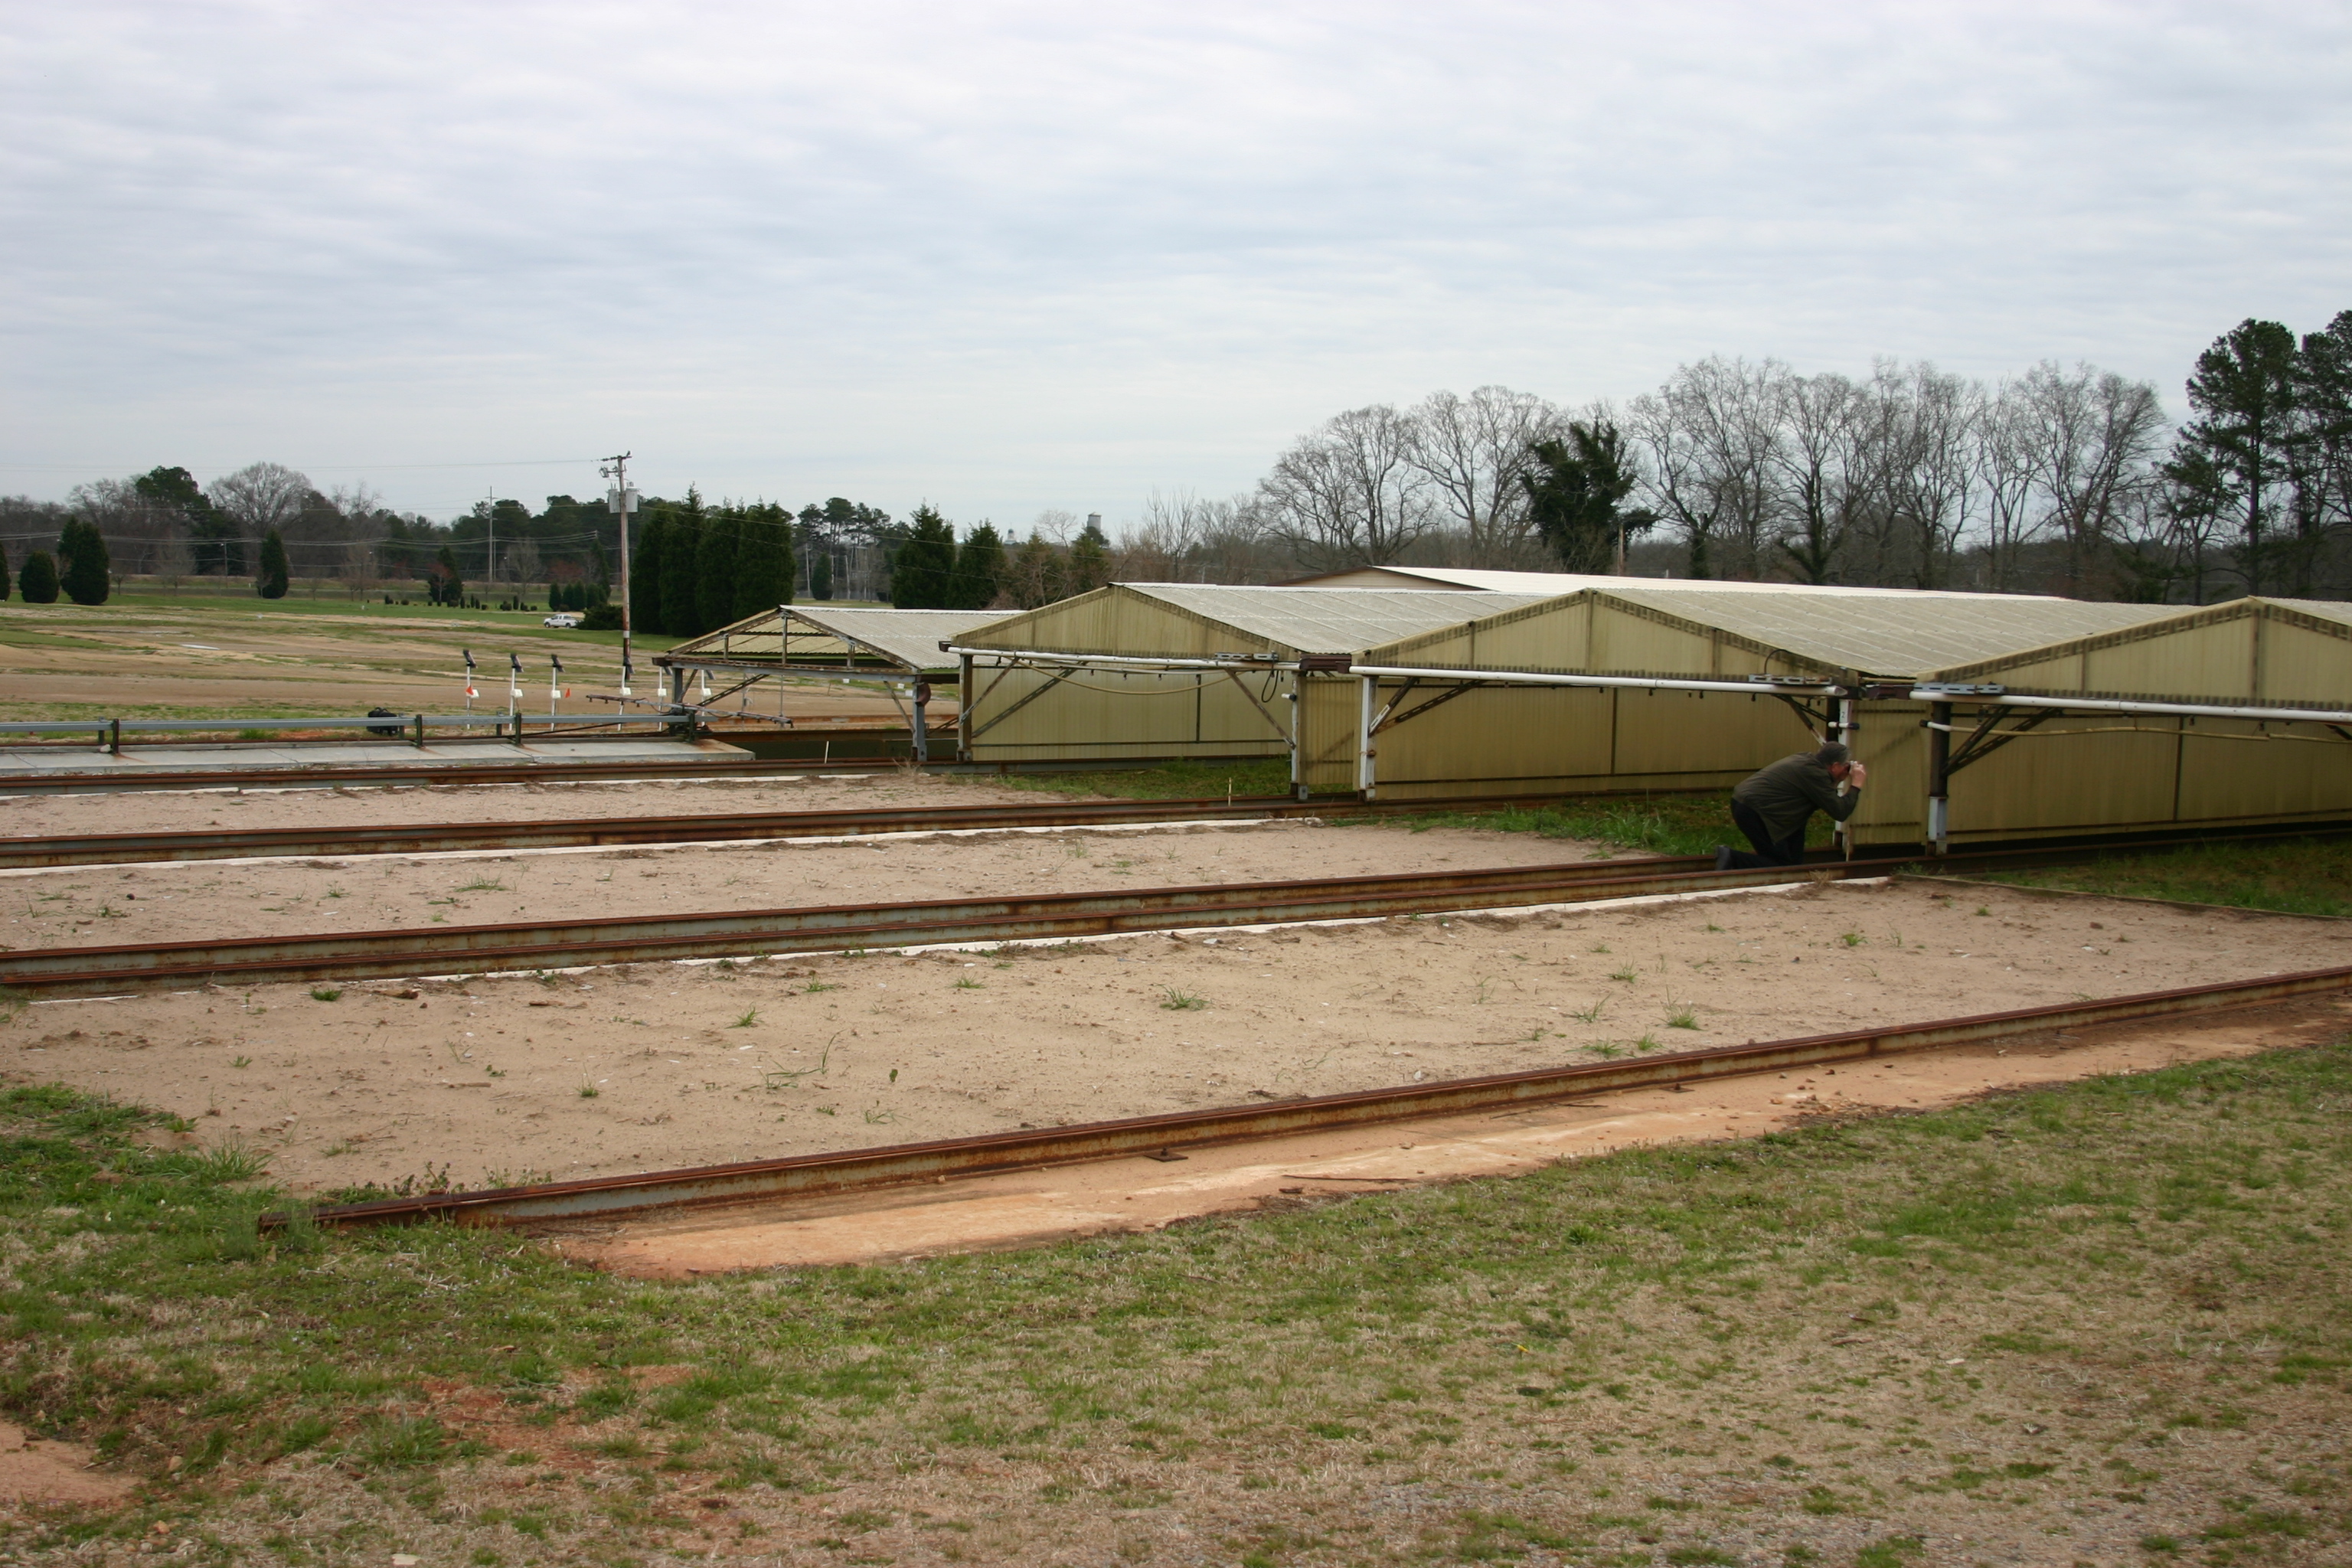 Images showcasing the structure and design of the small rainout shelter created by University of Georgia.